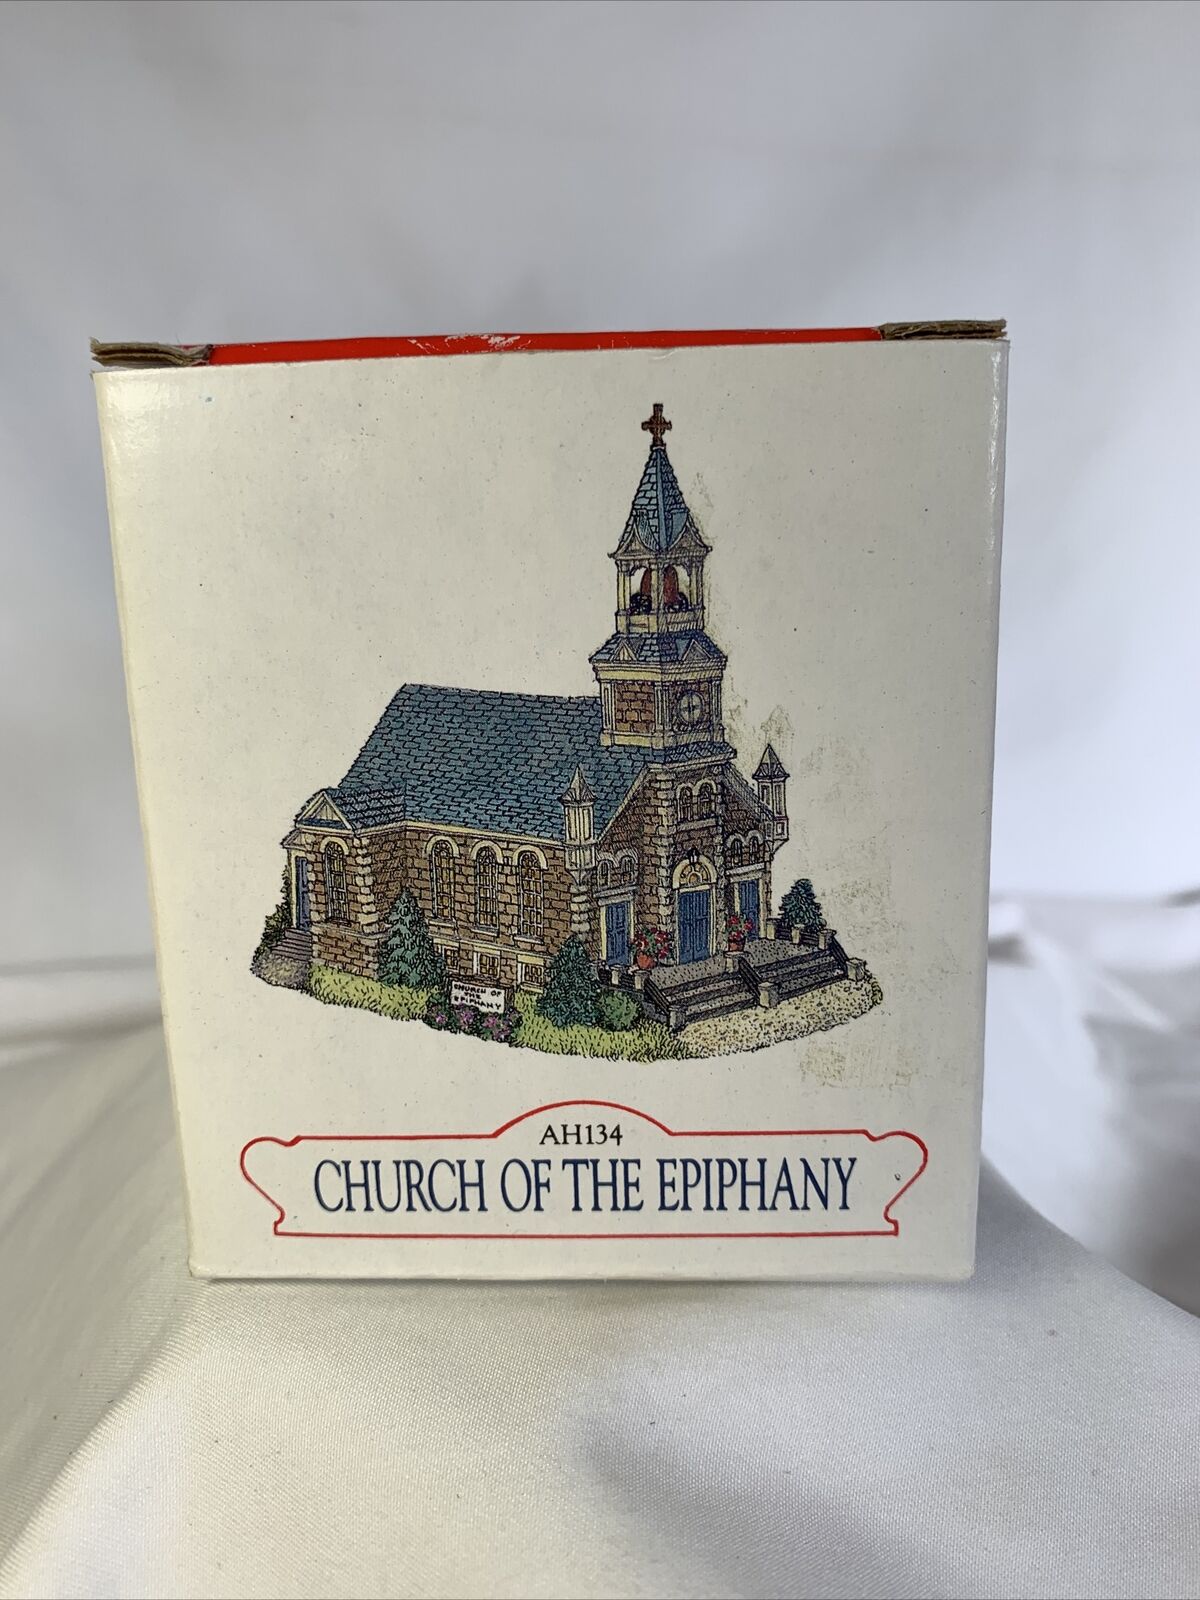  Liberty Falls Collection - AH134 Church of the Epiphany - 